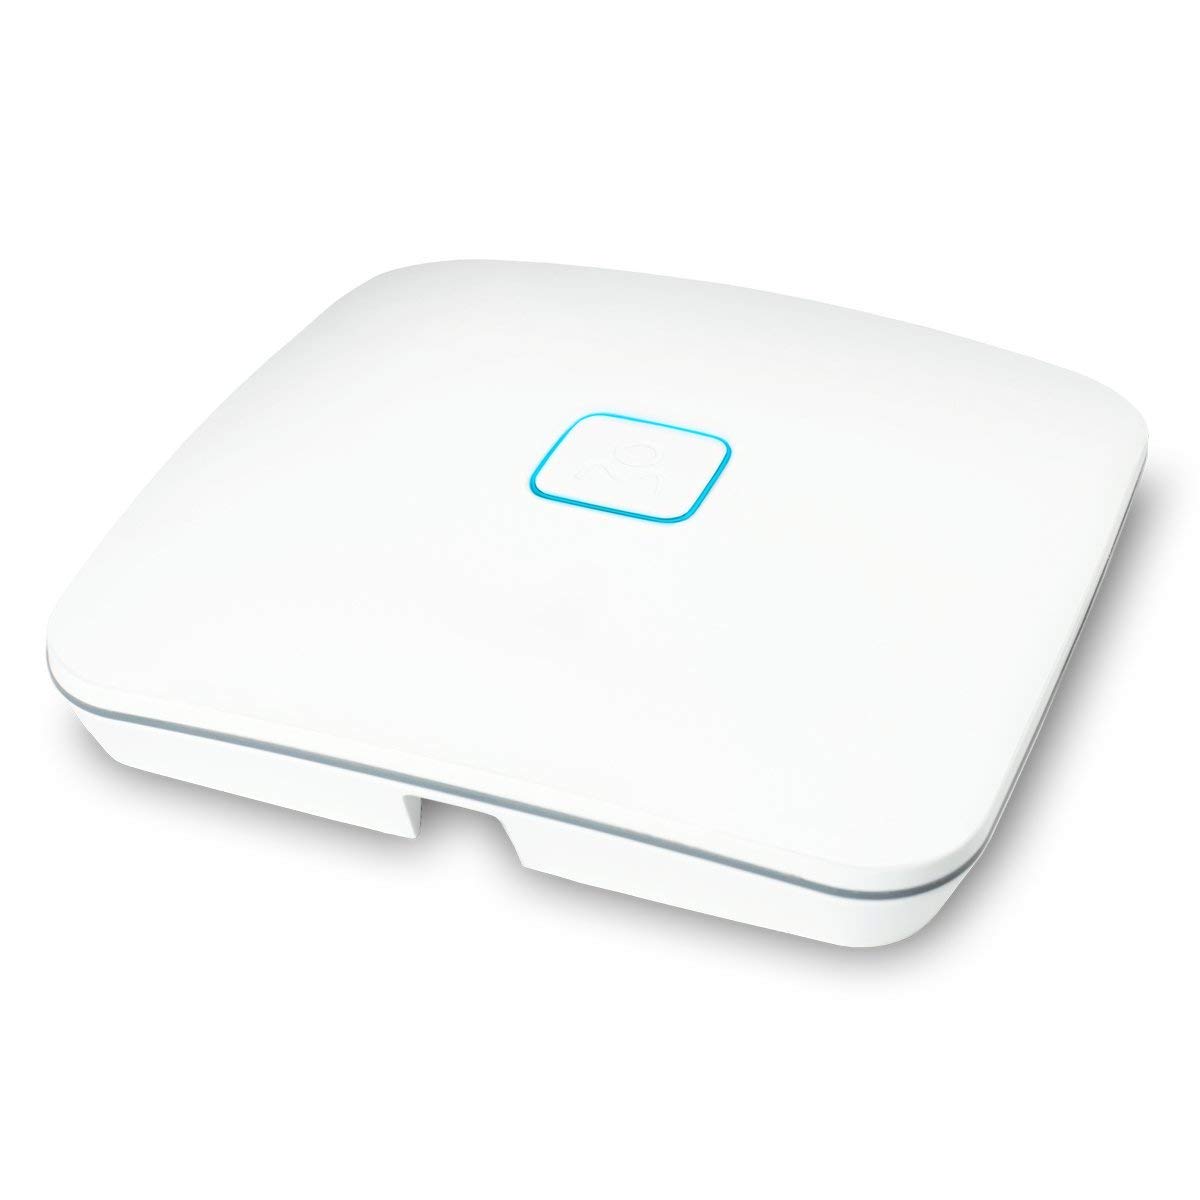 OPEN-MESH 2.4/5GHZ 2X2 MIMO ACCESS POINT (A42)